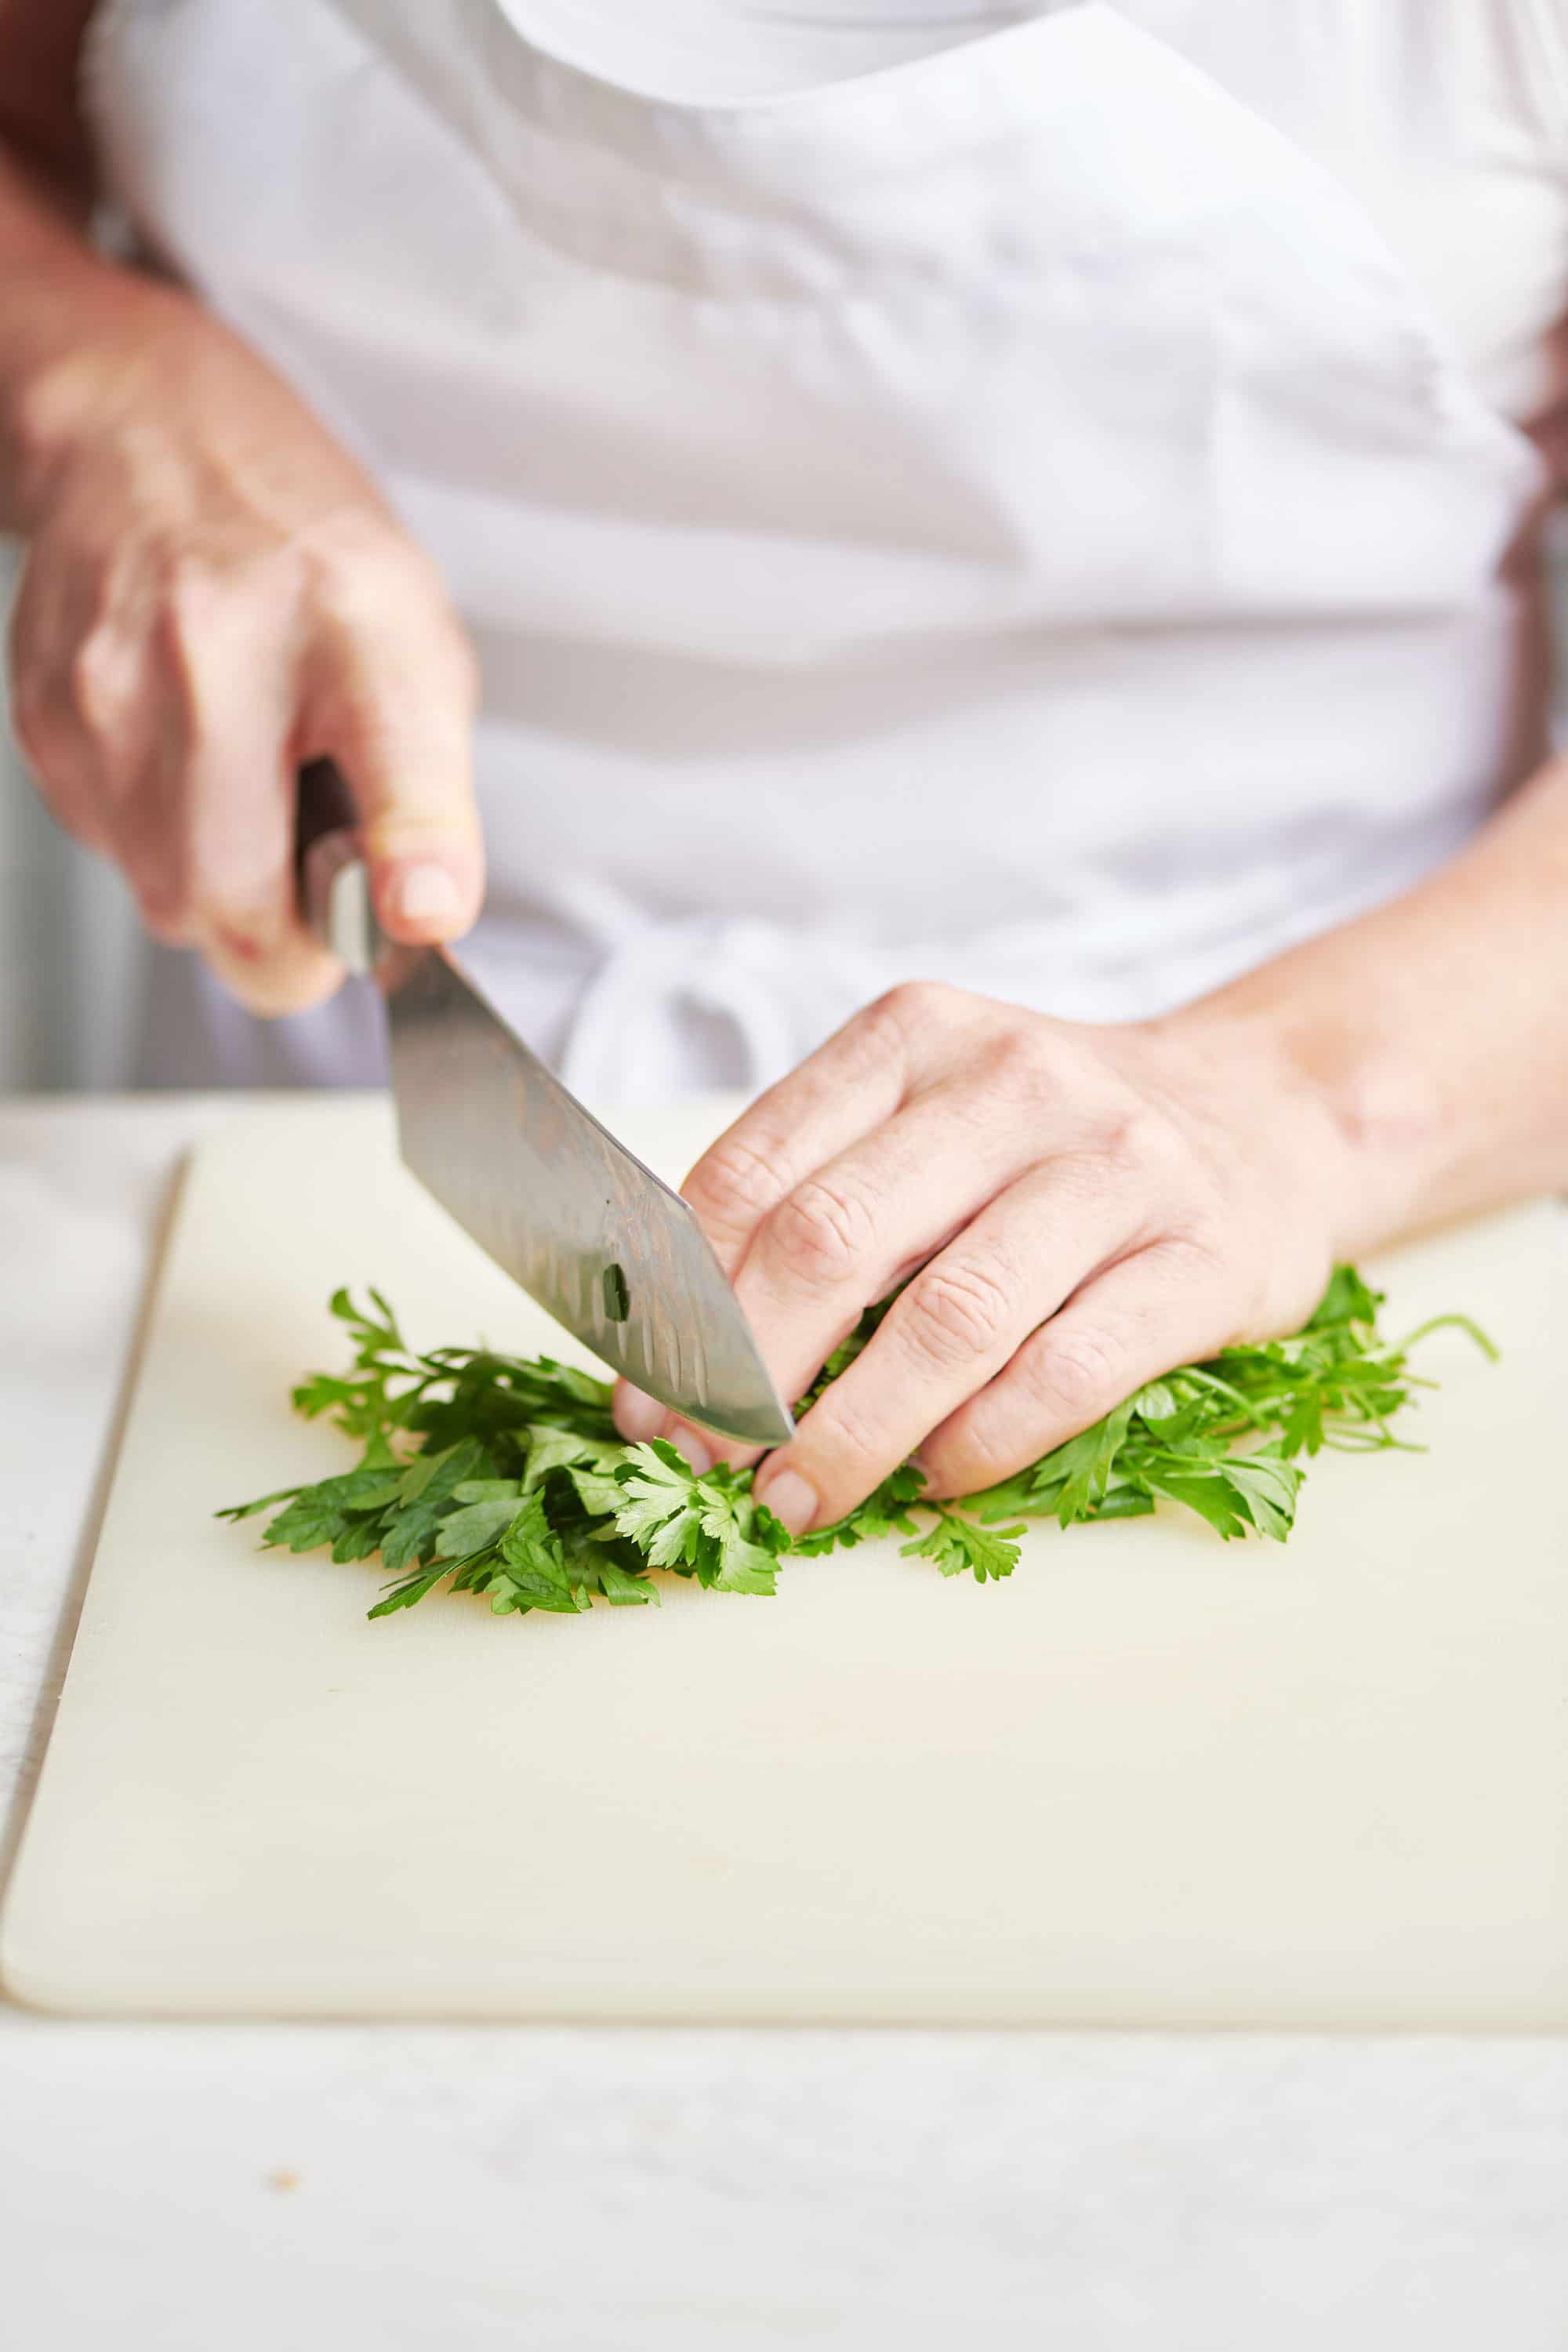 Chopping parsley on cutting board with chef knife.